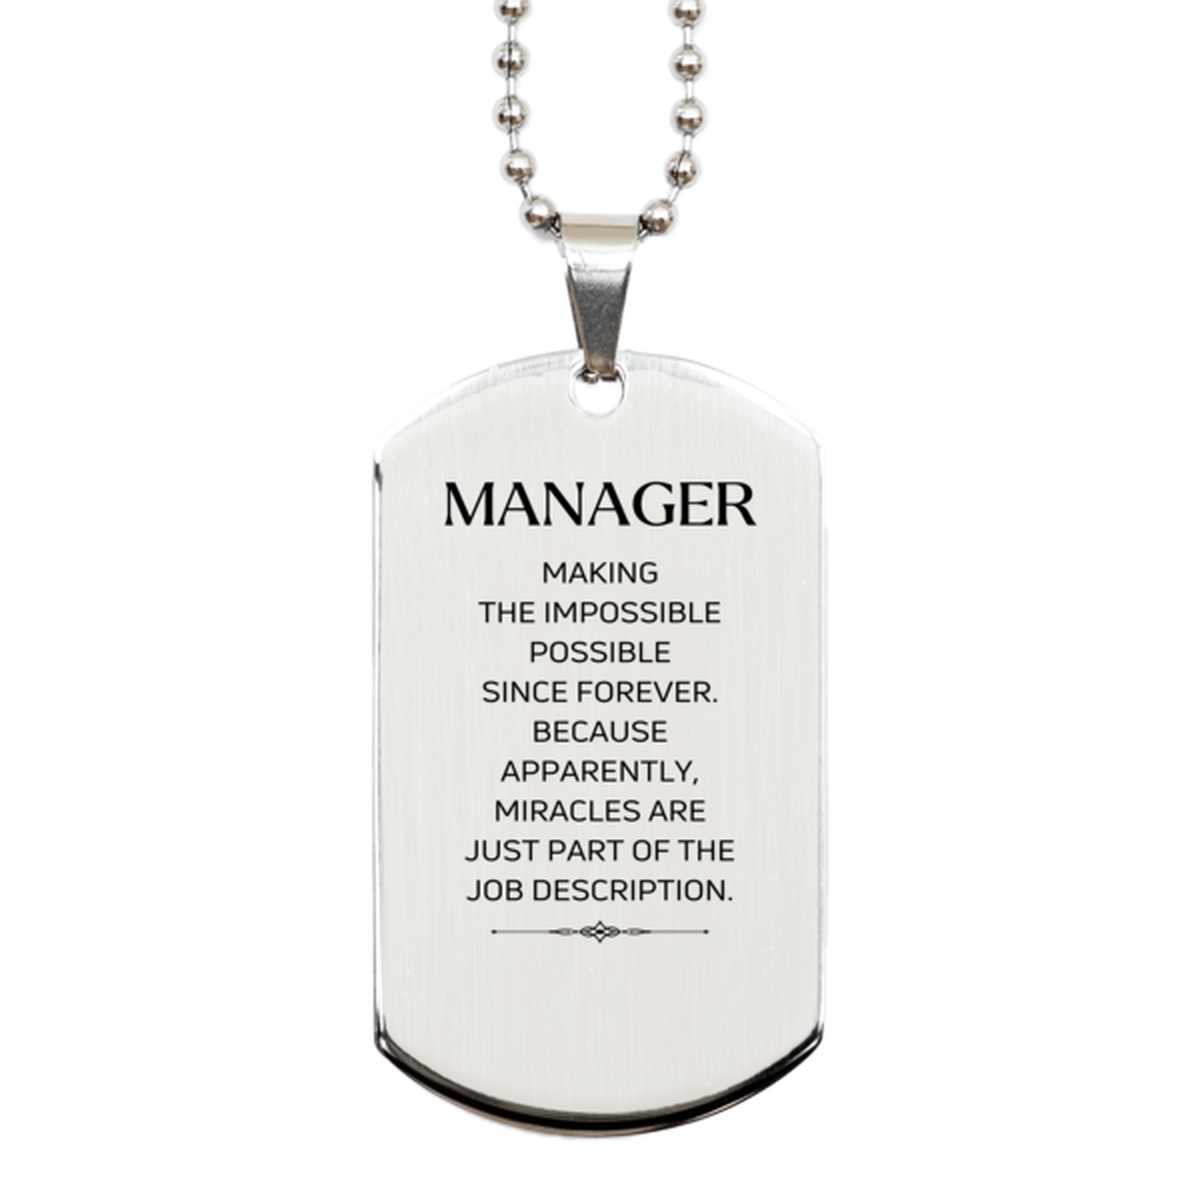 Funny Manager Gifts, Miracles are just part of the job description, Inspirational Birthday Silver Dog Tag For Manager, Men, Women, Coworkers, Friends, Boss